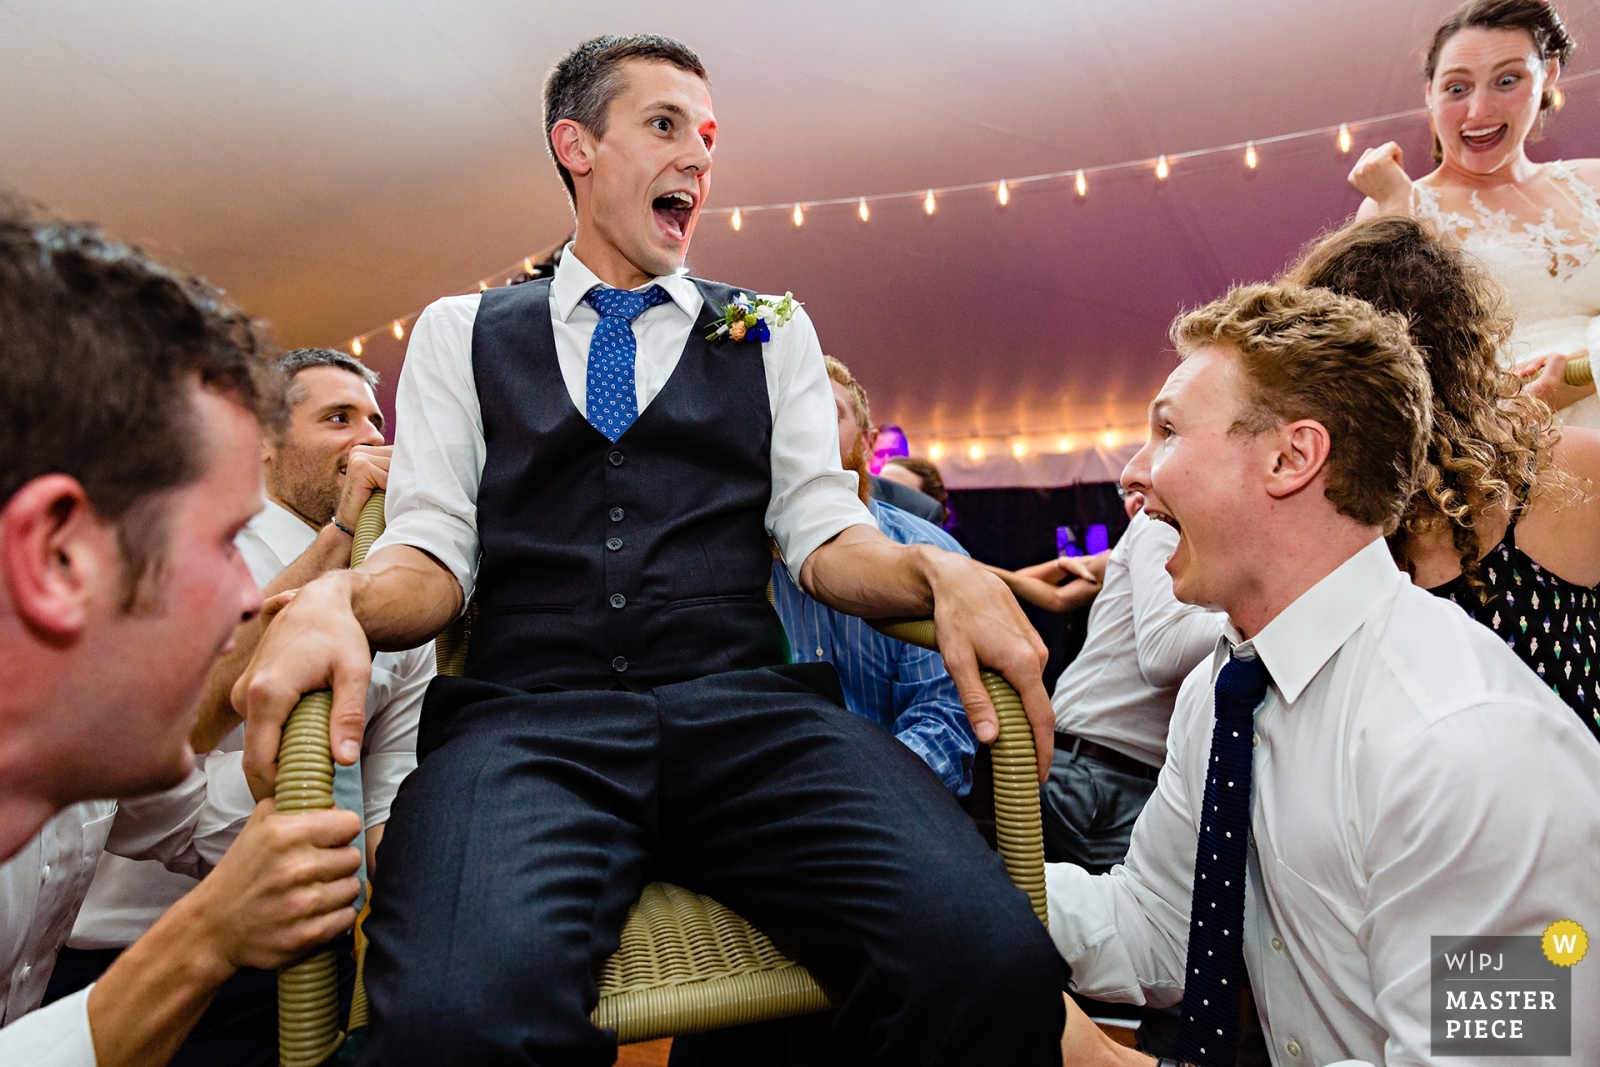 Ellsworth Maine Wedding Photographer with an award winning image of the hora dance at the tented reception up near Bar Harbor Maine